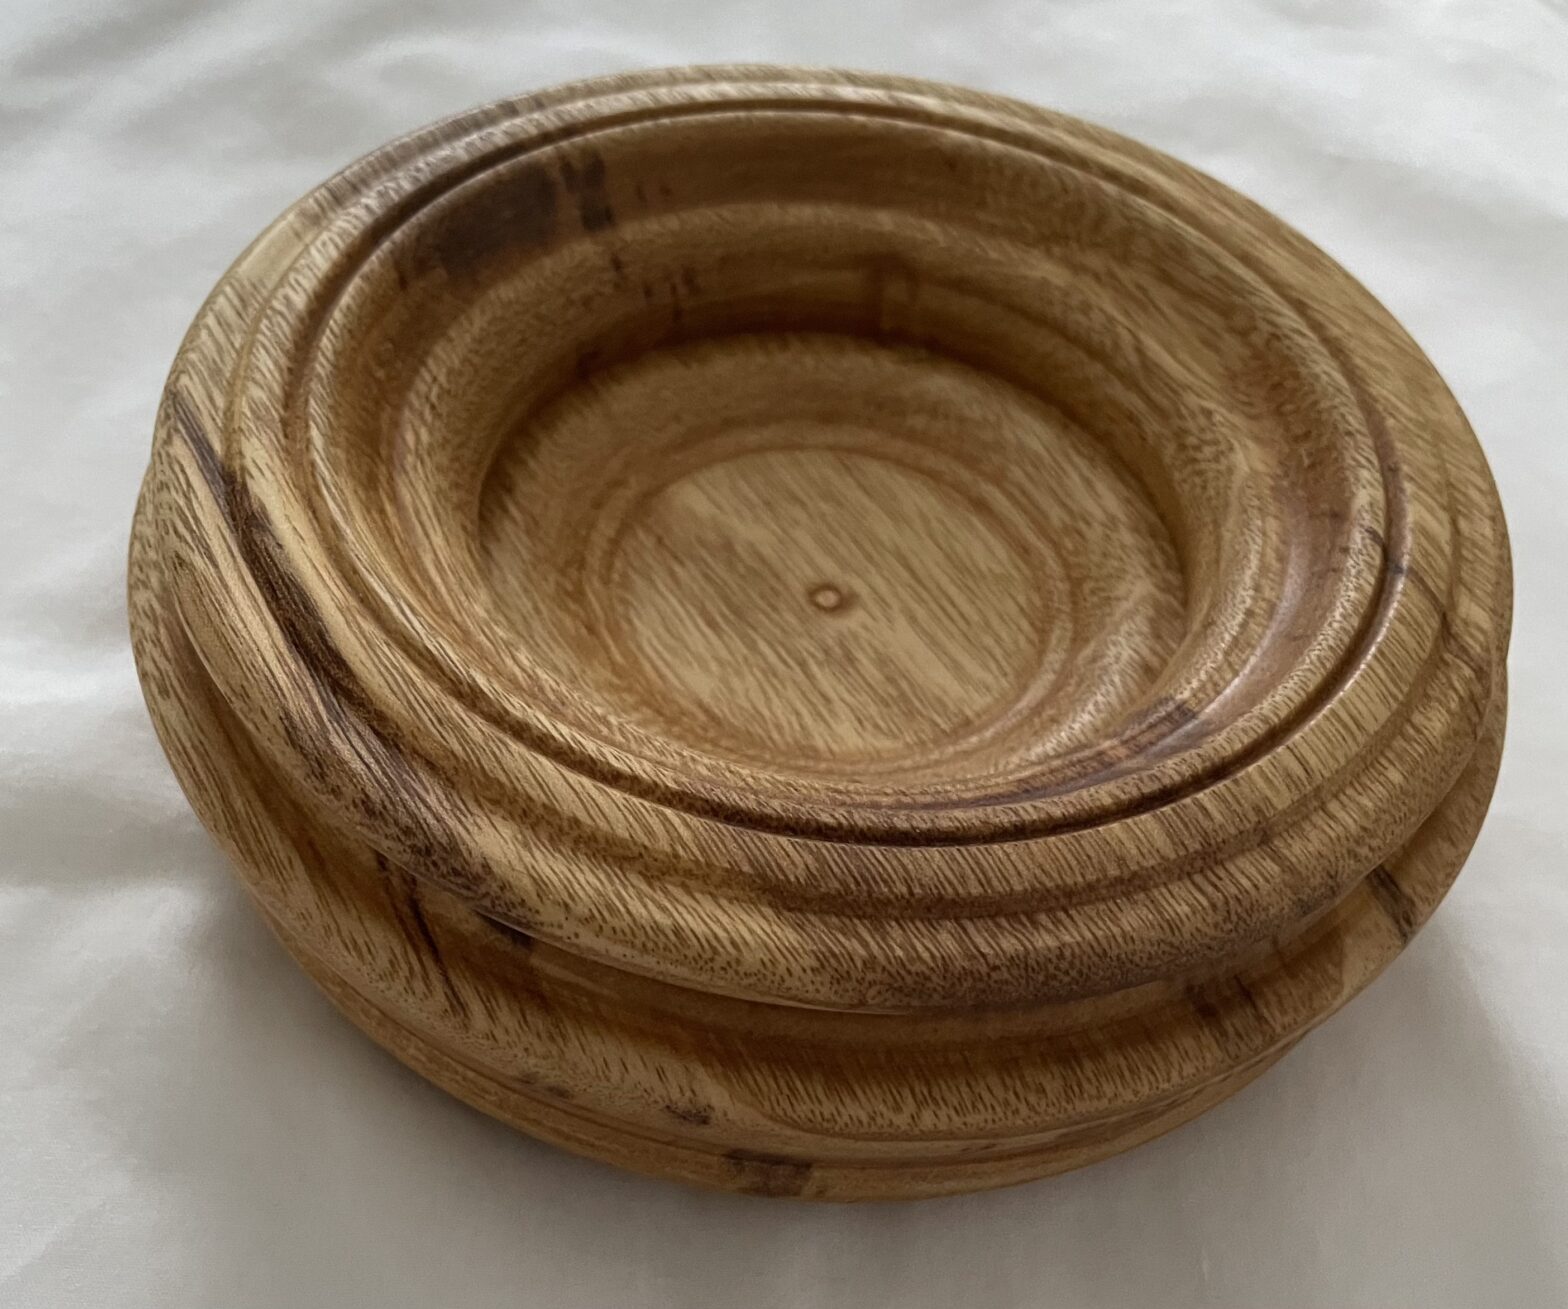 Top View Of Bowl